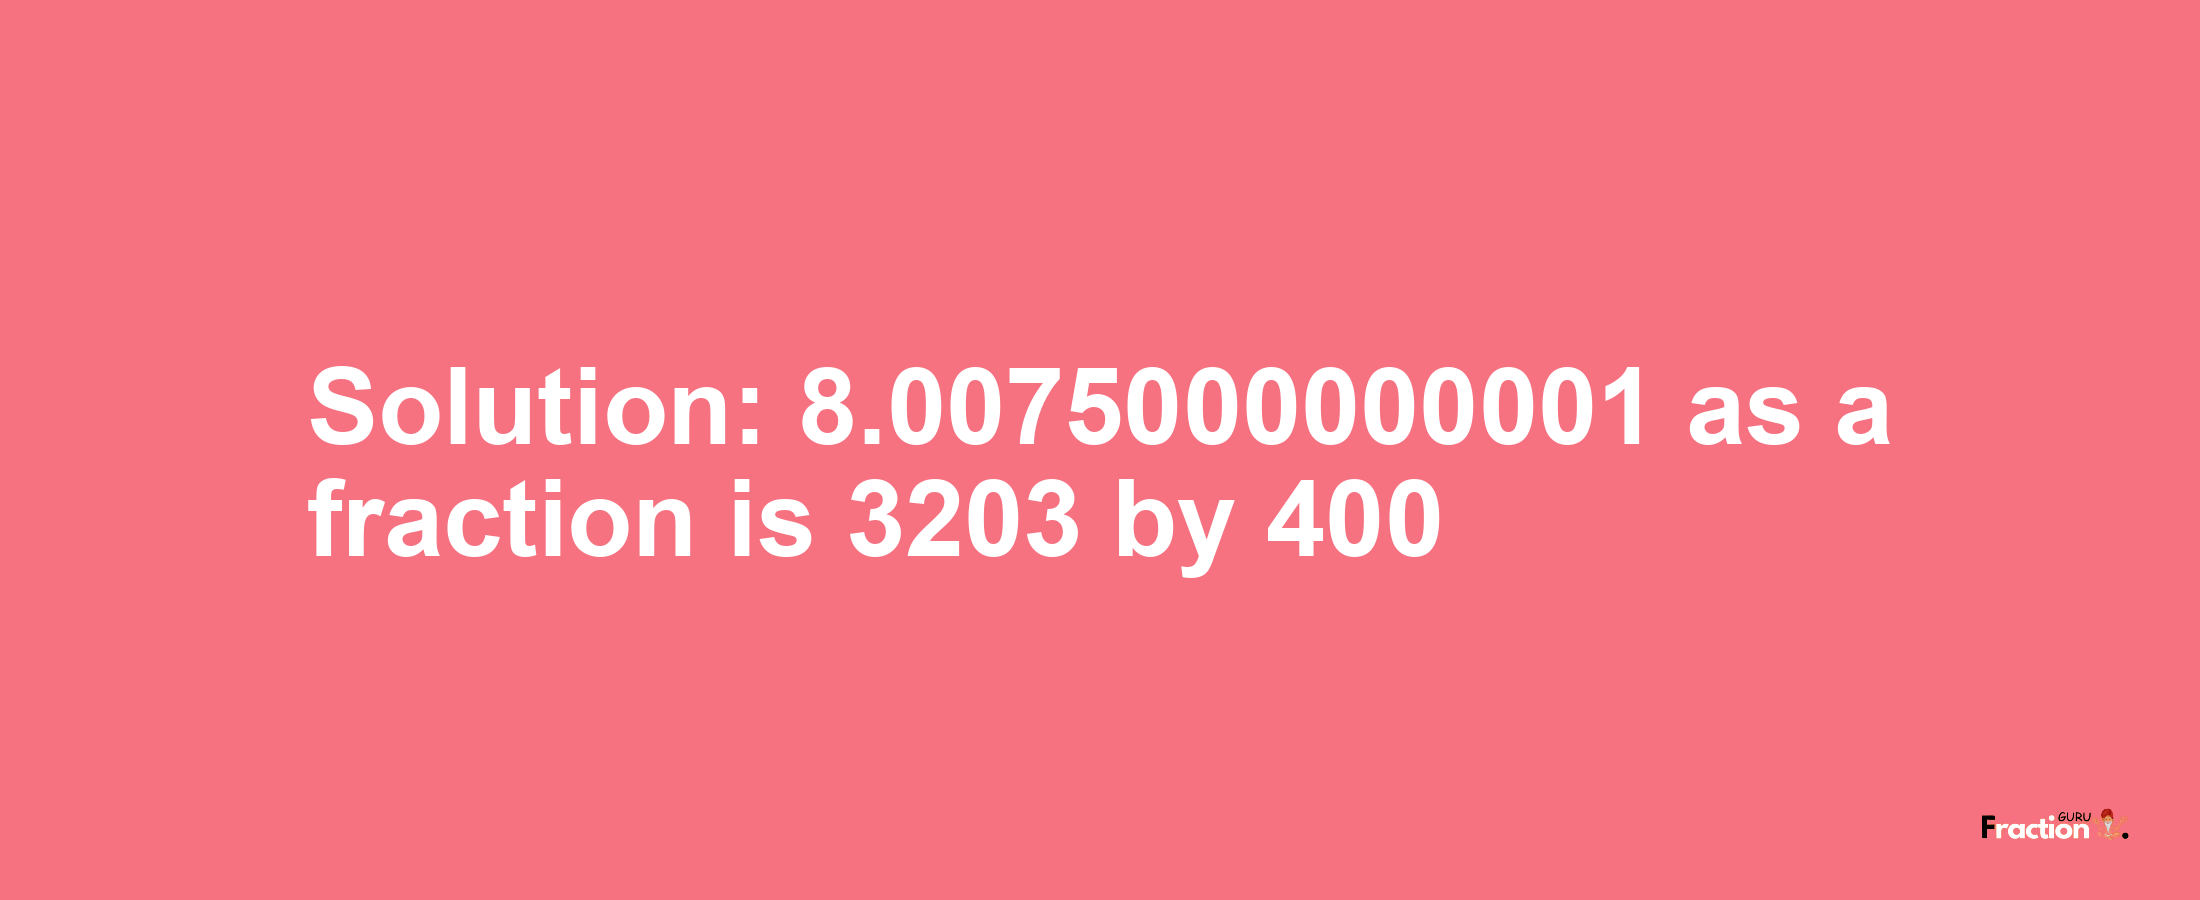 Solution:8.0075000000001 as a fraction is 3203/400